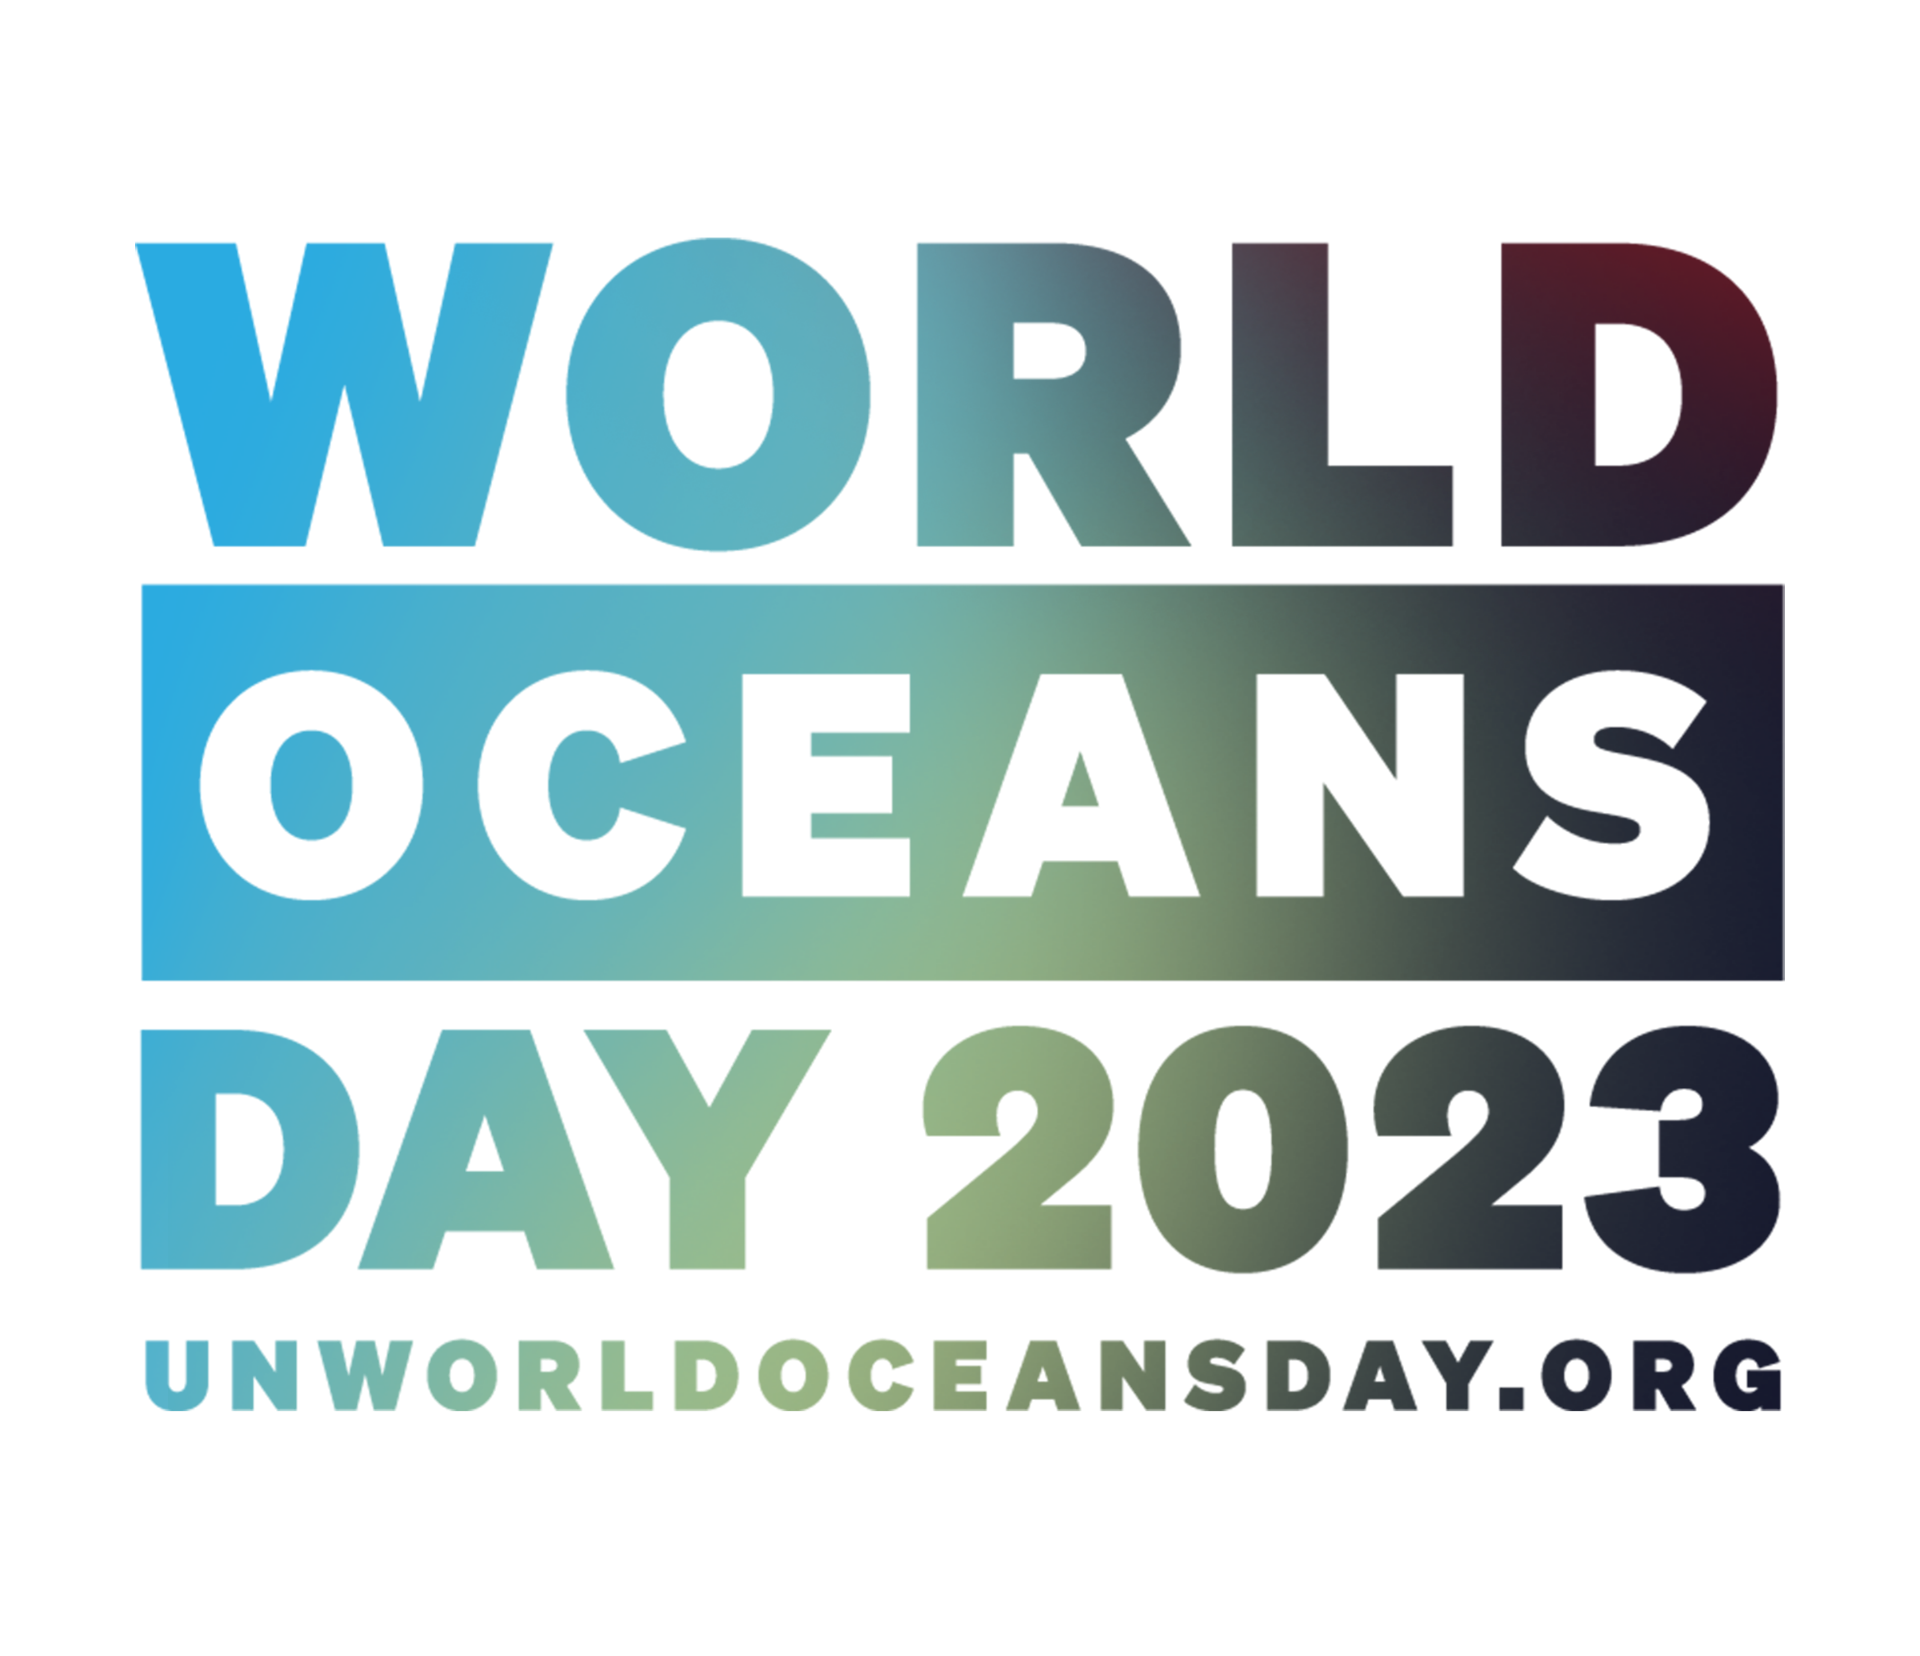 Go to the WorldOceansDay website